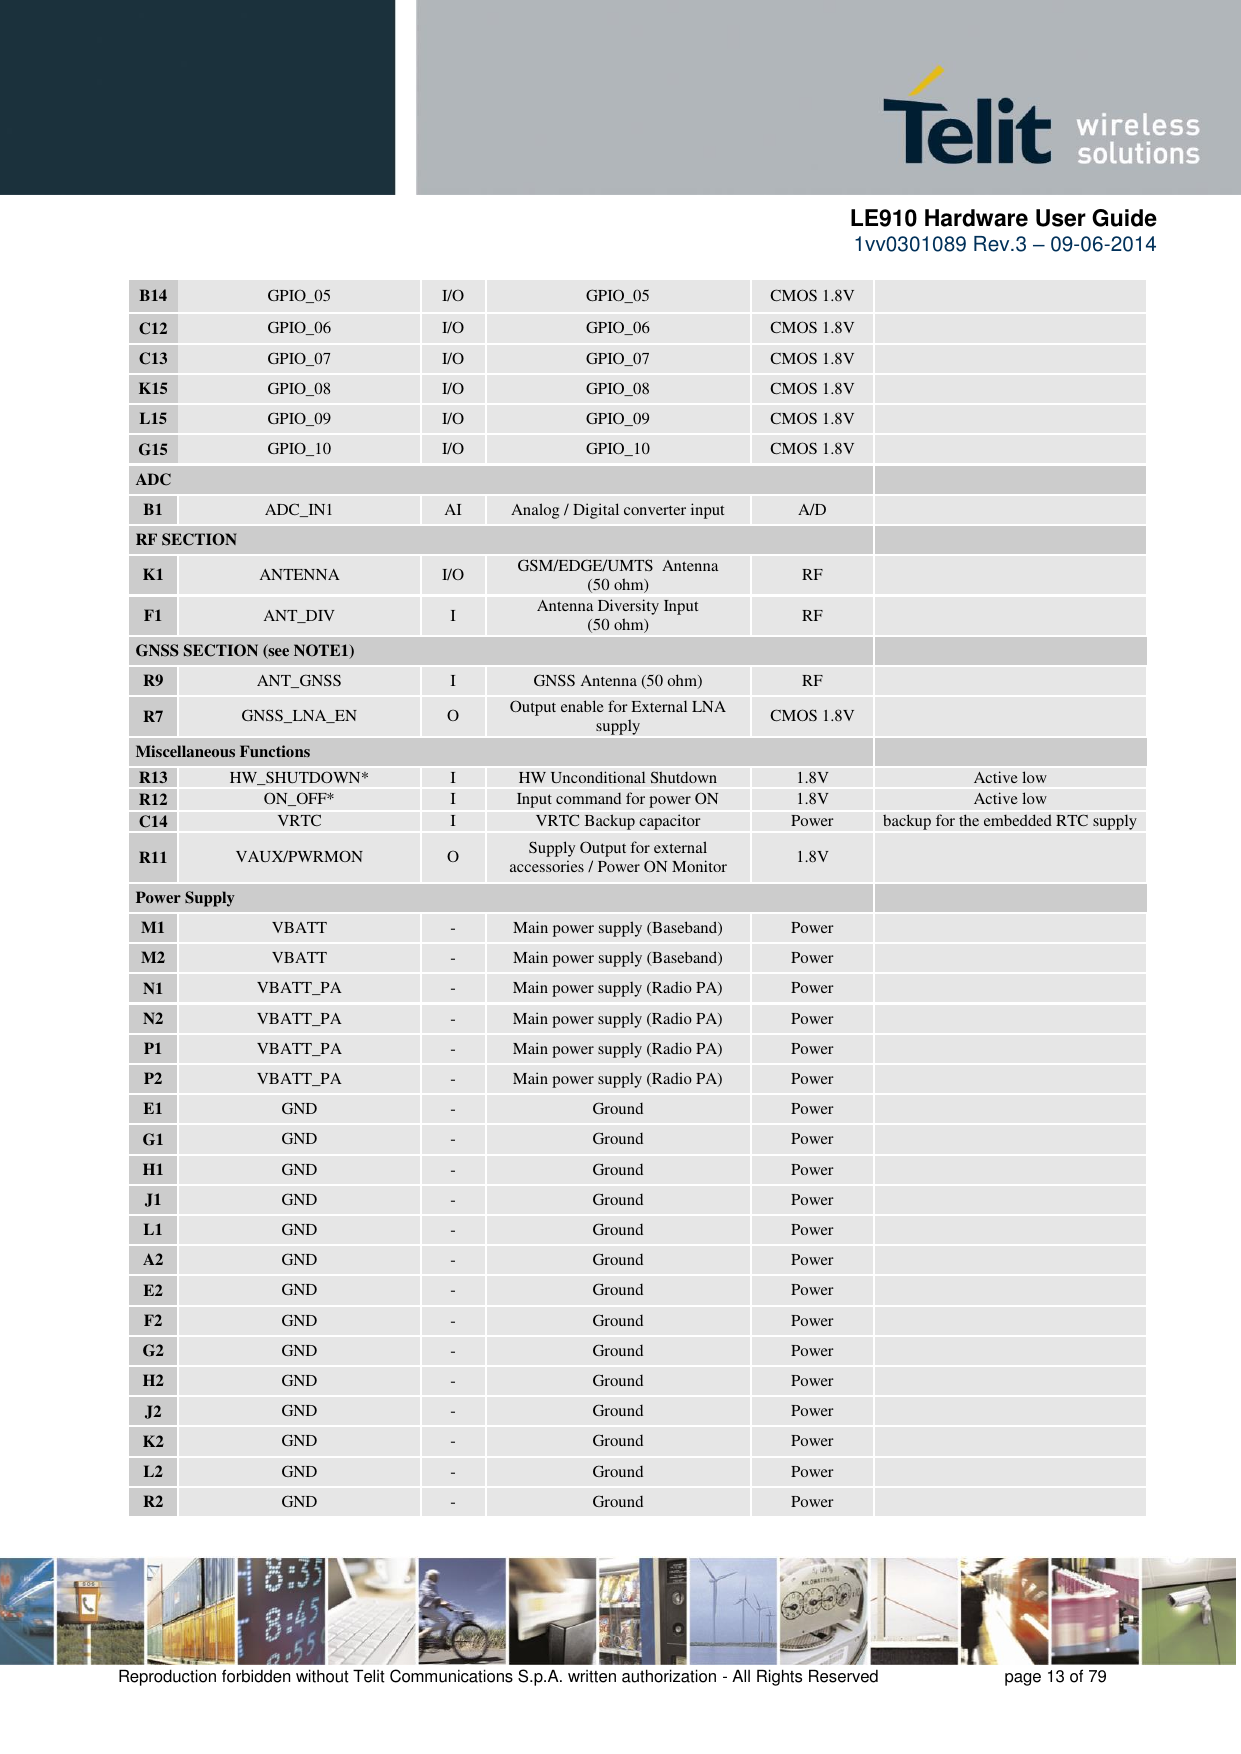      LE910 Hardware User Guide 1vv0301089 Rev.3 – 09-06-2014    Reproduction forbidden without Telit Communications S.p.A. written authorization - All Rights Reserved    page 13 of 79  B14 GPIO_05 I/O GPIO_05  CMOS 1.8V  C12 GPIO_06 I/O GPIO_06 CMOS 1.8V  C13 GPIO_07 I/O GPIO_07  CMOS 1.8V  K15 GPIO_08 I/O GPIO_08 CMOS 1.8V  L15 GPIO_09 I/O GPIO_09 CMOS 1.8V  G15 GPIO_10 I/O GPIO_10 CMOS 1.8V  ADC     B1 ADC_IN1 AI Analog / Digital converter input A/D  RF SECTION     K1 ANTENNA I/O GSM/EDGE/UMTS  Antenna  (50 ohm) RF  F1 ANT_DIV I Antenna Diversity Input  (50 ohm) RF  GNSS SECTION (see NOTE1)     R9 ANT_GNSS I GNSS Antenna (50 ohm) RF  R7 GNSS_LNA_EN O Output enable for External LNA supply CMOS 1.8V  Miscellaneous Functions     R13 HW_SHUTDOWN* I HW Unconditional Shutdown 1.8V Active low R12 ON_OFF* I Input command for power ON 1.8V Active low C14 VRTC I VRTC Backup capacitor Power backup for the embedded RTC supply R11 VAUX/PWRMON O Supply Output for external accessories / Power ON Monitor 1.8V  Power Supply     M1 VBATT - Main power supply (Baseband) Power  M2 VBATT - Main power supply (Baseband) Power  N1 VBATT_PA - Main power supply (Radio PA) Power  N2 VBATT_PA - Main power supply (Radio PA) Power  P1 VBATT_PA - Main power supply (Radio PA) Power  P2 VBATT_PA - Main power supply (Radio PA) Power  E1 GND - Ground Power  G1 GND - Ground Power  H1 GND - Ground Power  J1 GND - Ground Power  L1 GND - Ground Power  A2 GND - Ground Power  E2 GND - Ground Power  F2 GND - Ground Power  G2 GND - Ground Power  H2 GND - Ground Power  J2 GND - Ground Power  K2 GND - Ground Power  L2 GND - Ground Power  R2 GND - Ground Power  